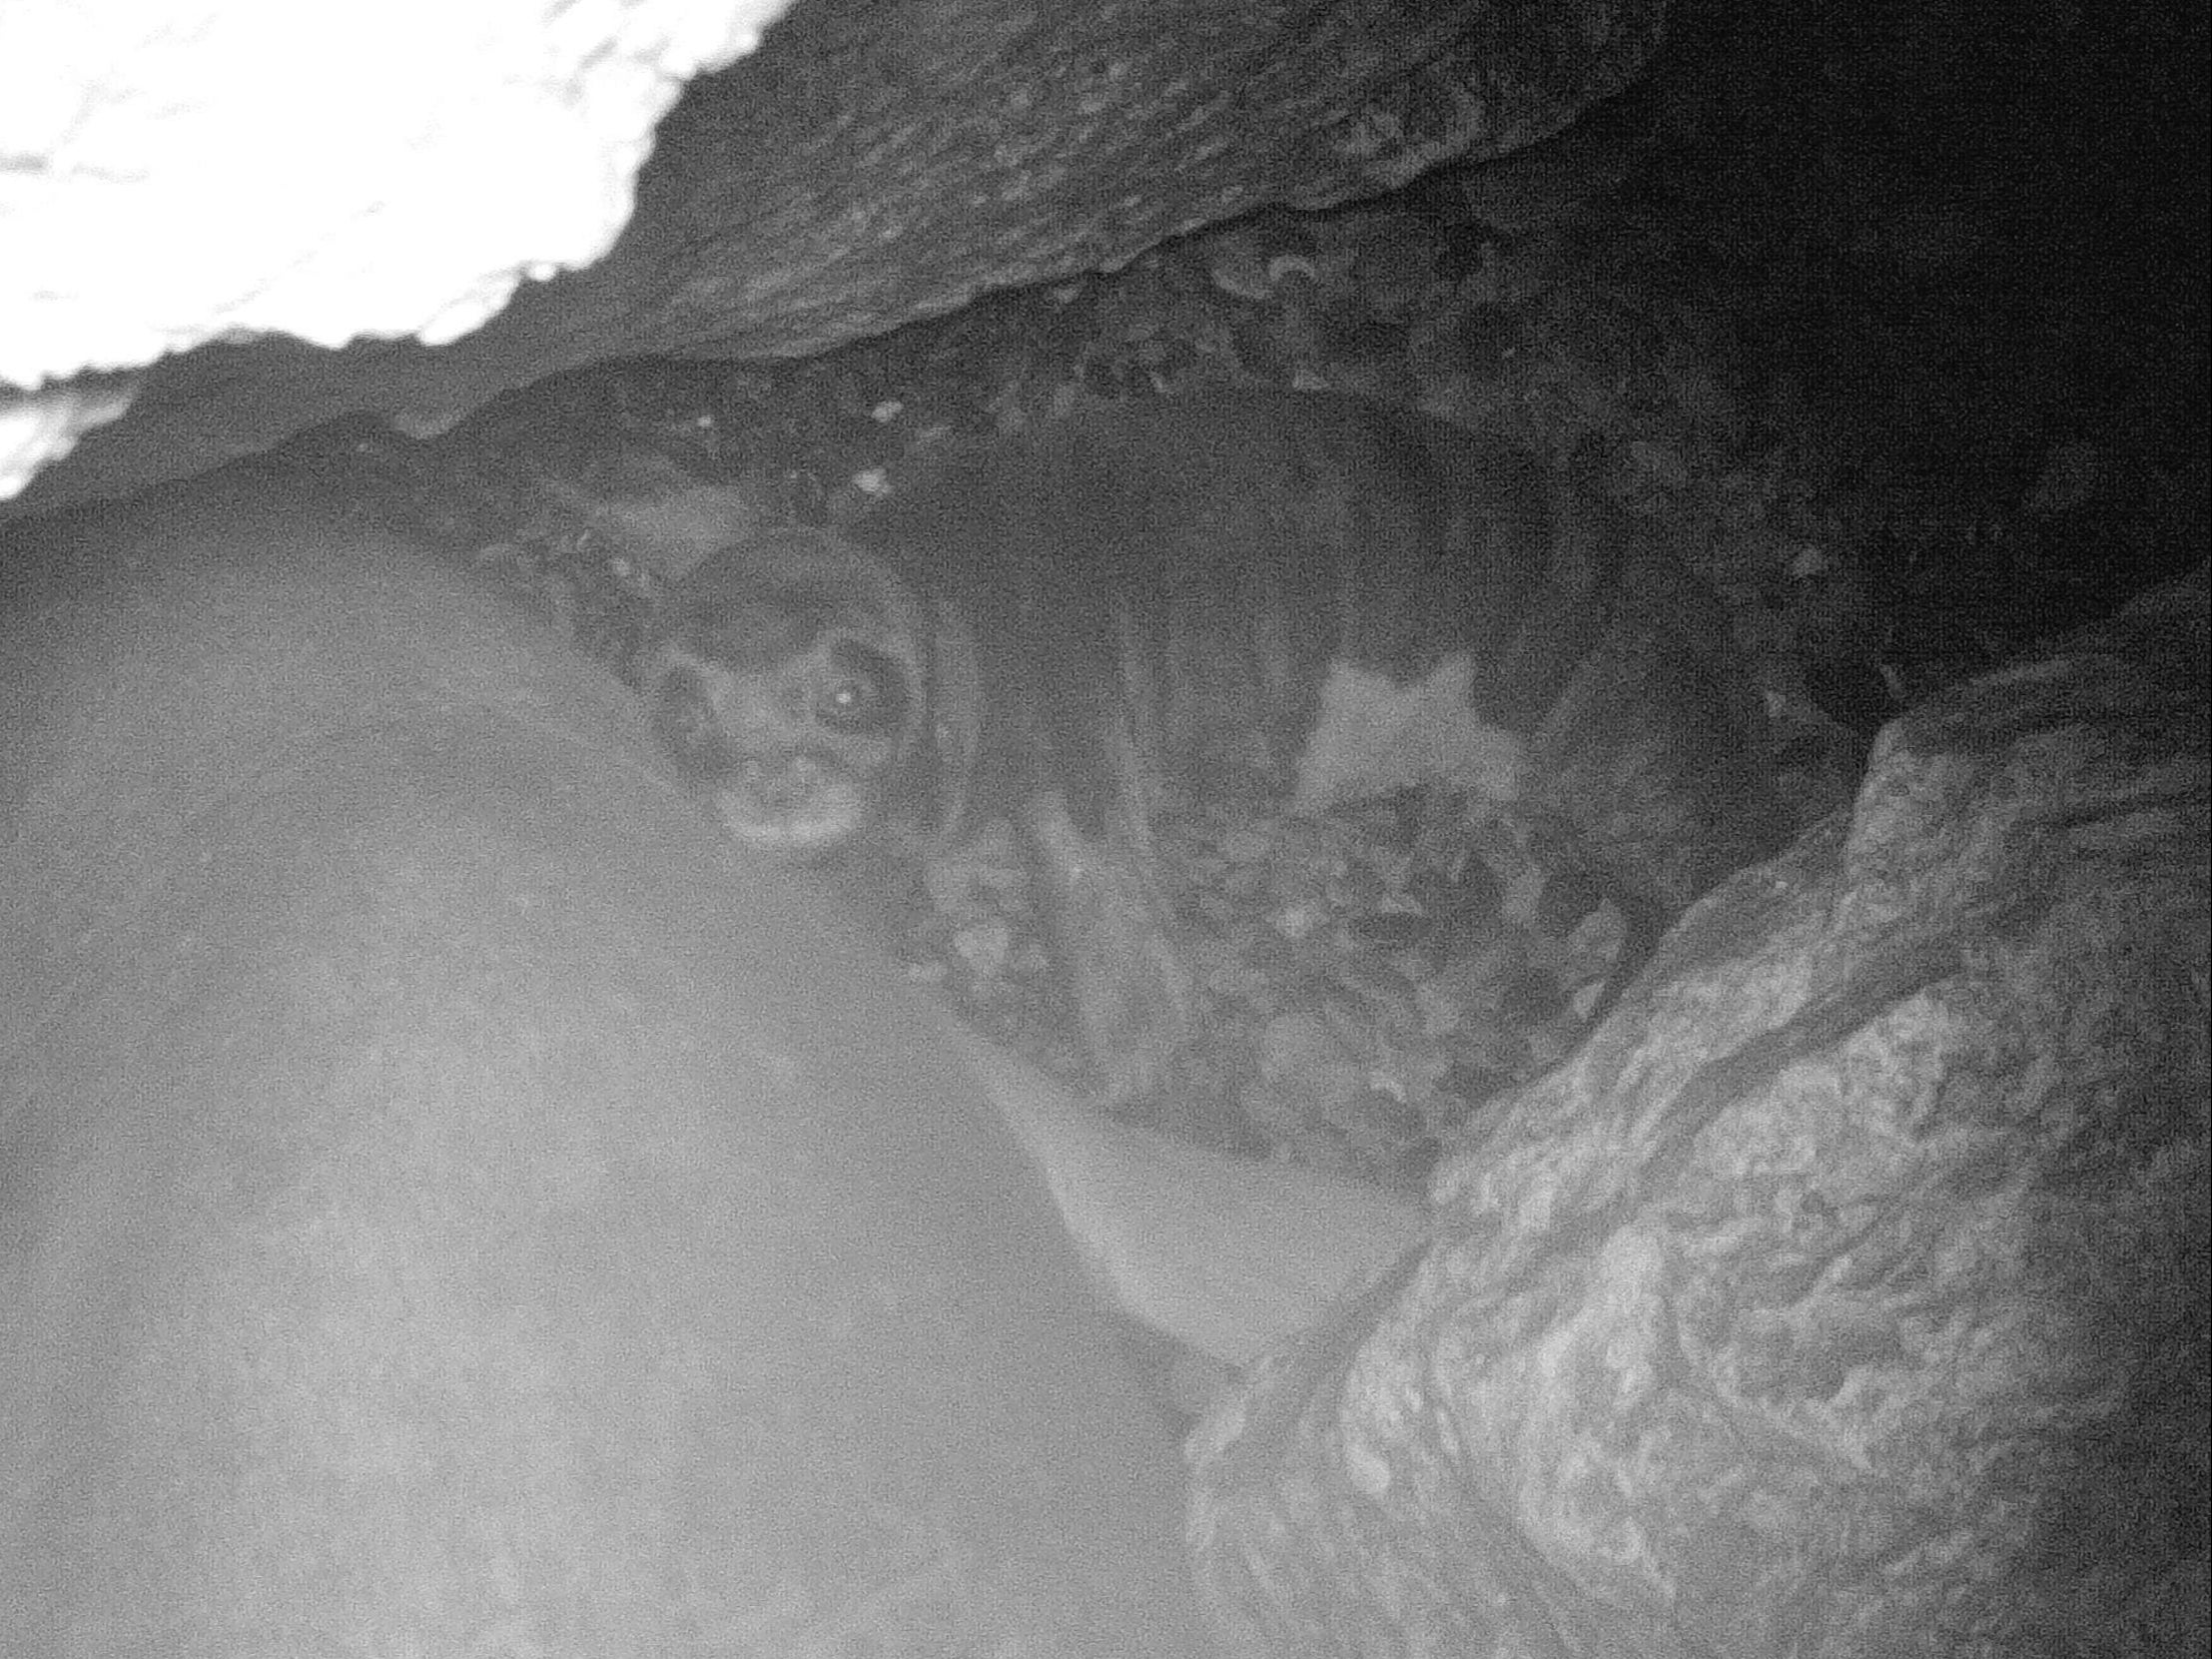 Camera trap image of baby Mediterranean monk seal in caves on Cyprus